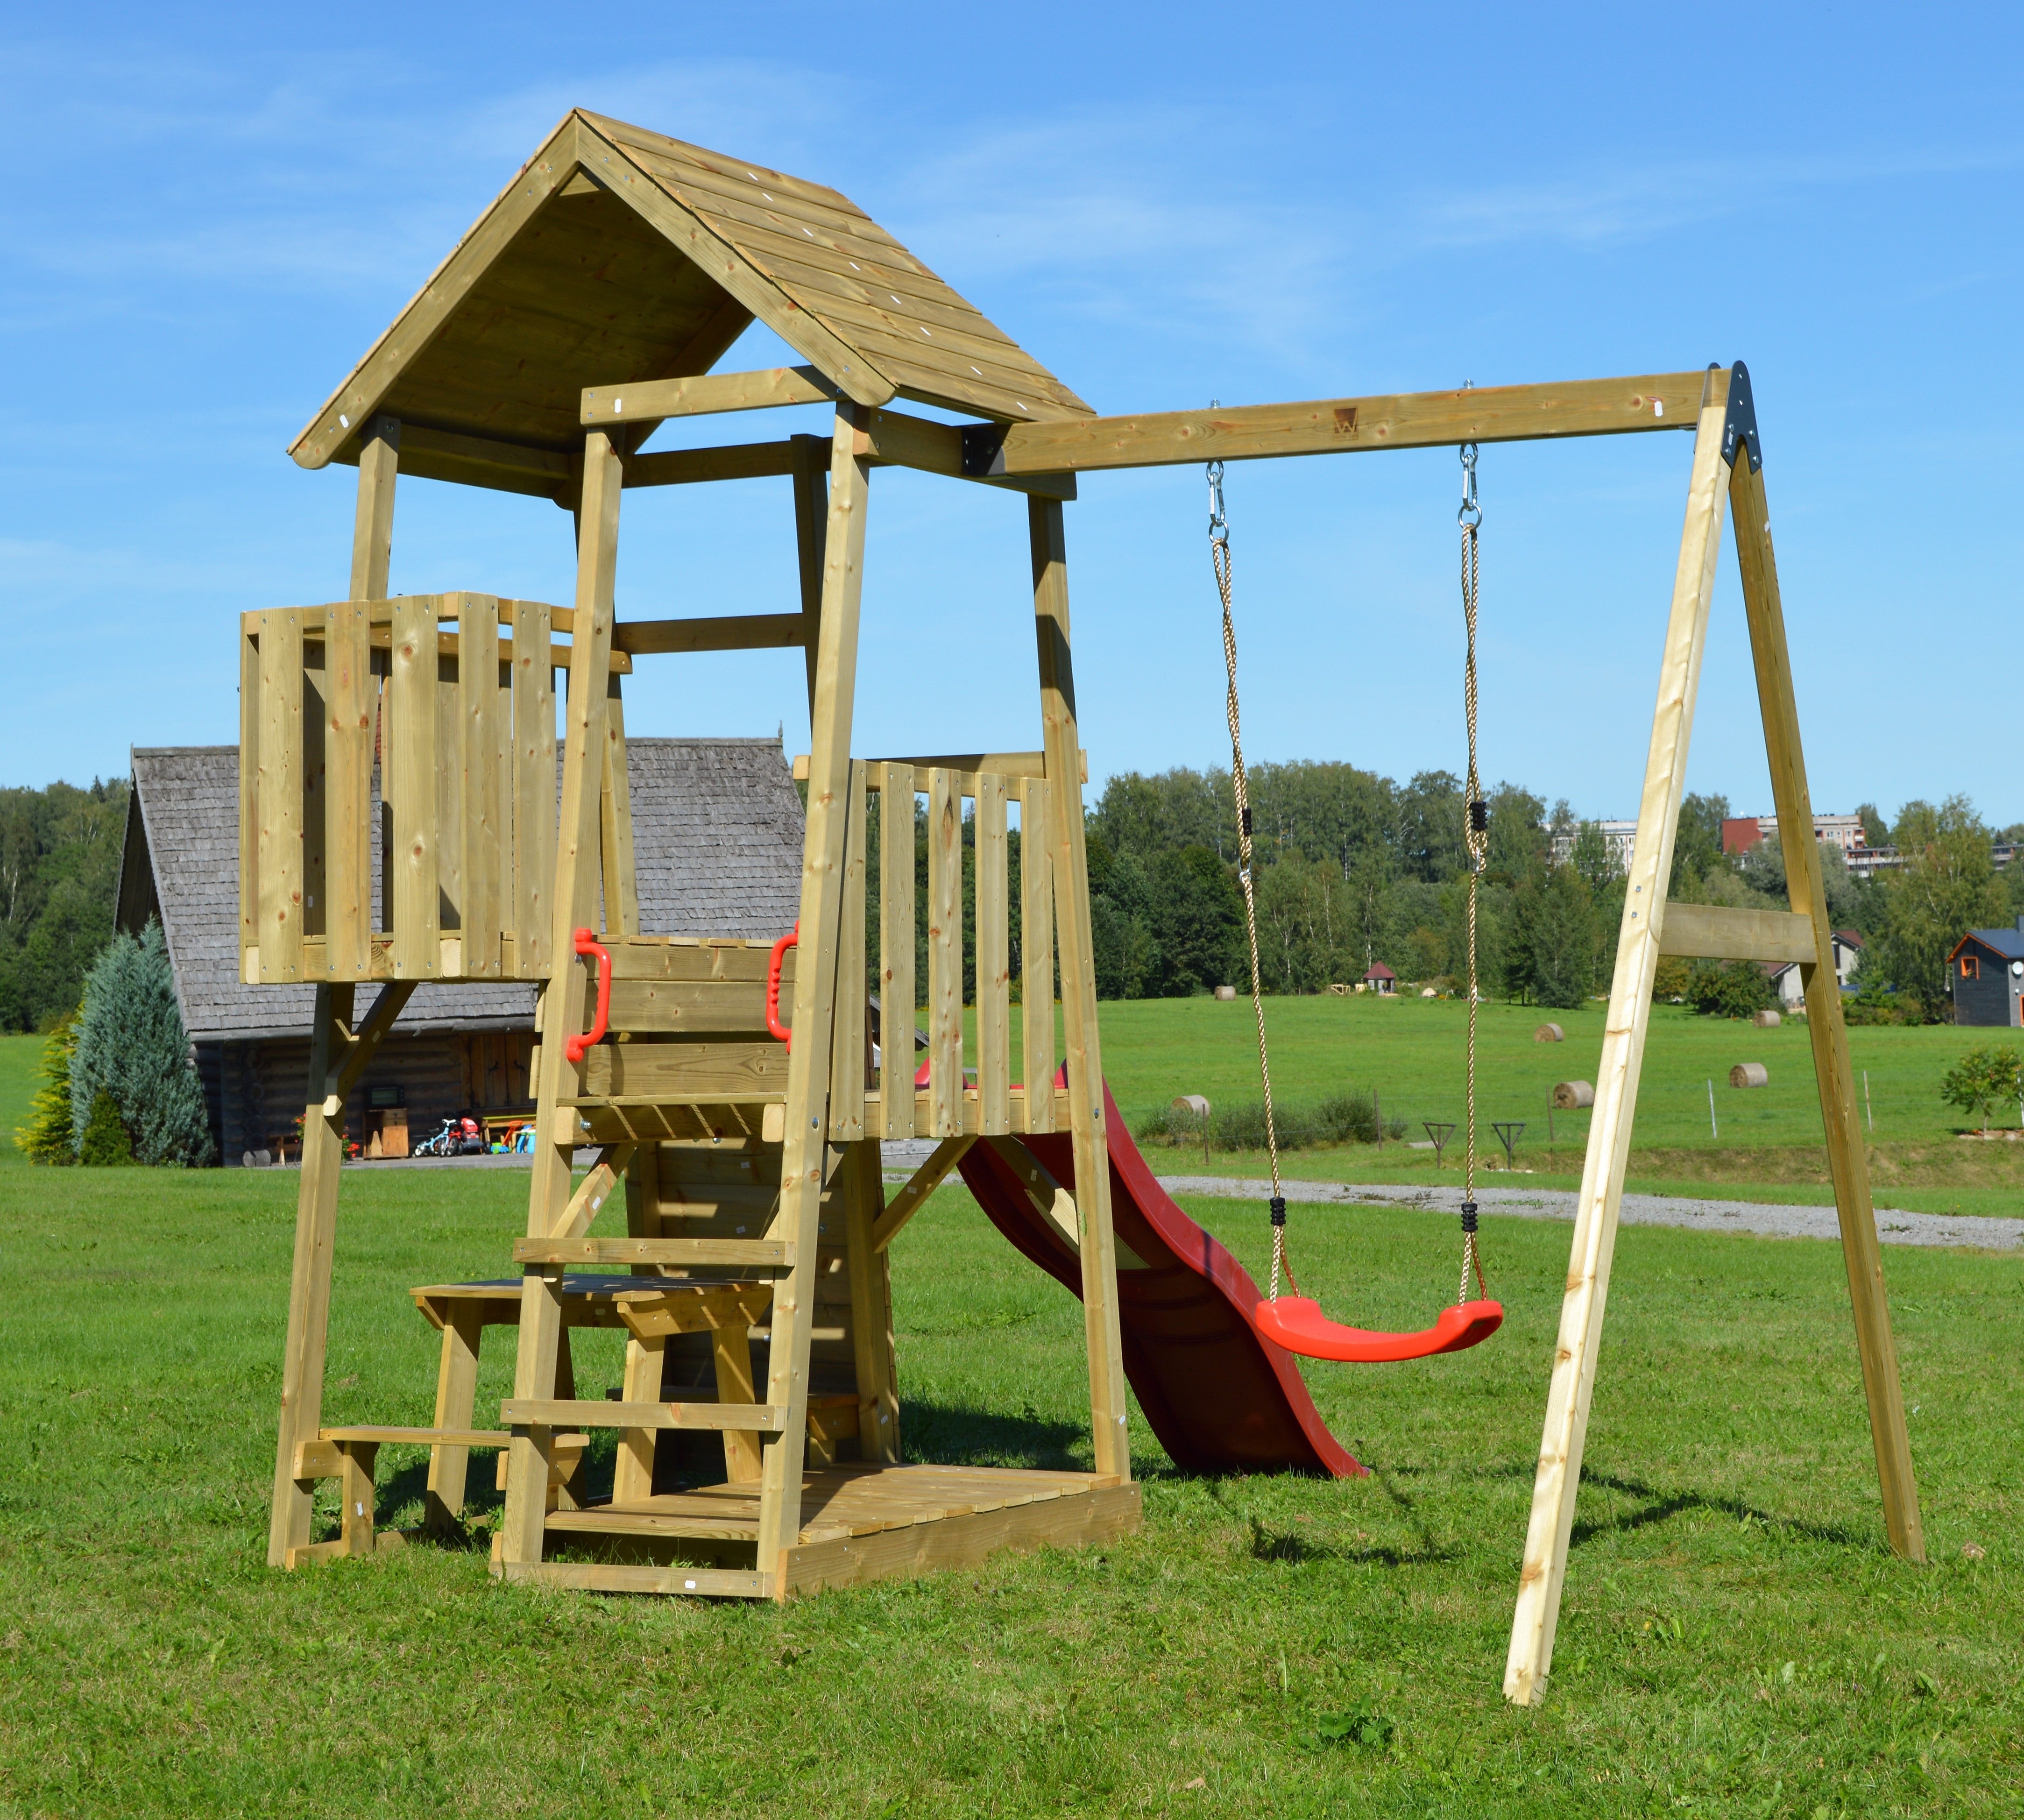 J8 Junior Activity Tower with Slide, Sandpit, Picnick Bench and Single Swing